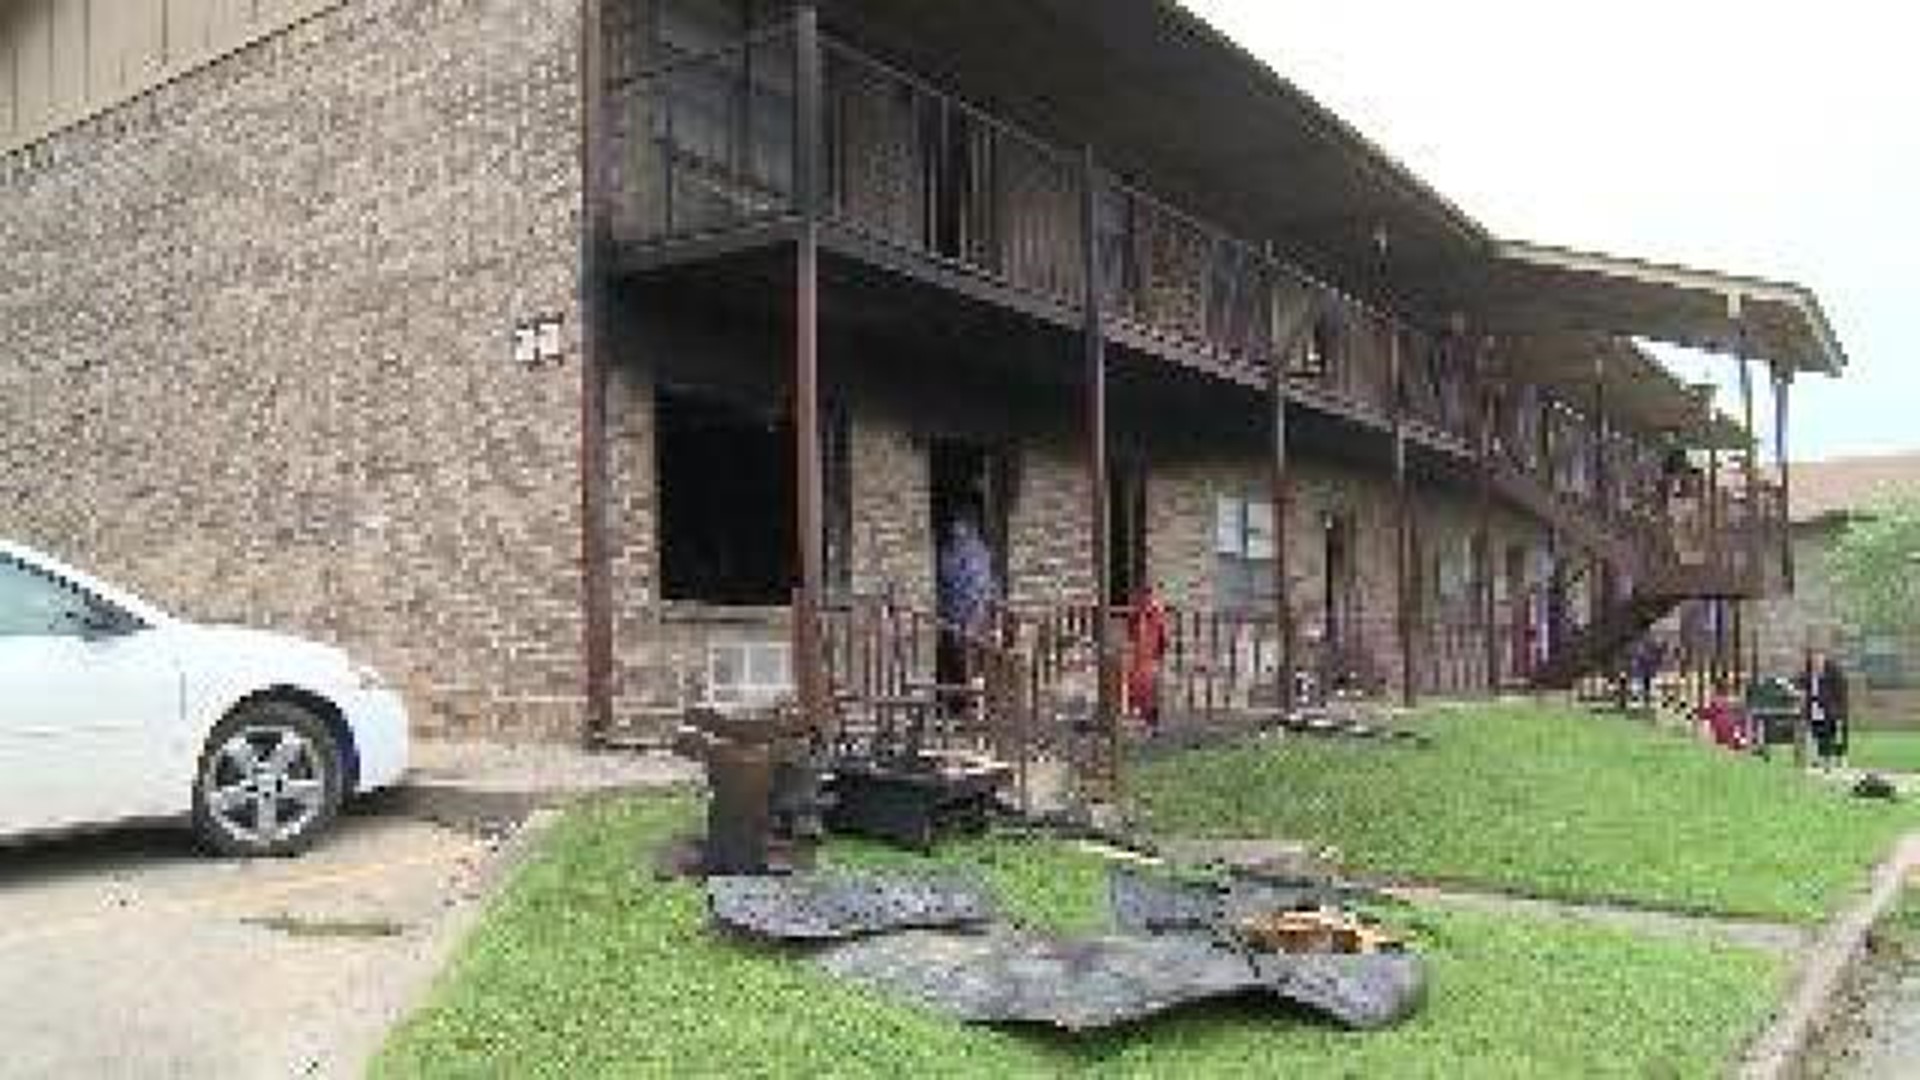 Families Displaced After Apartment Fire